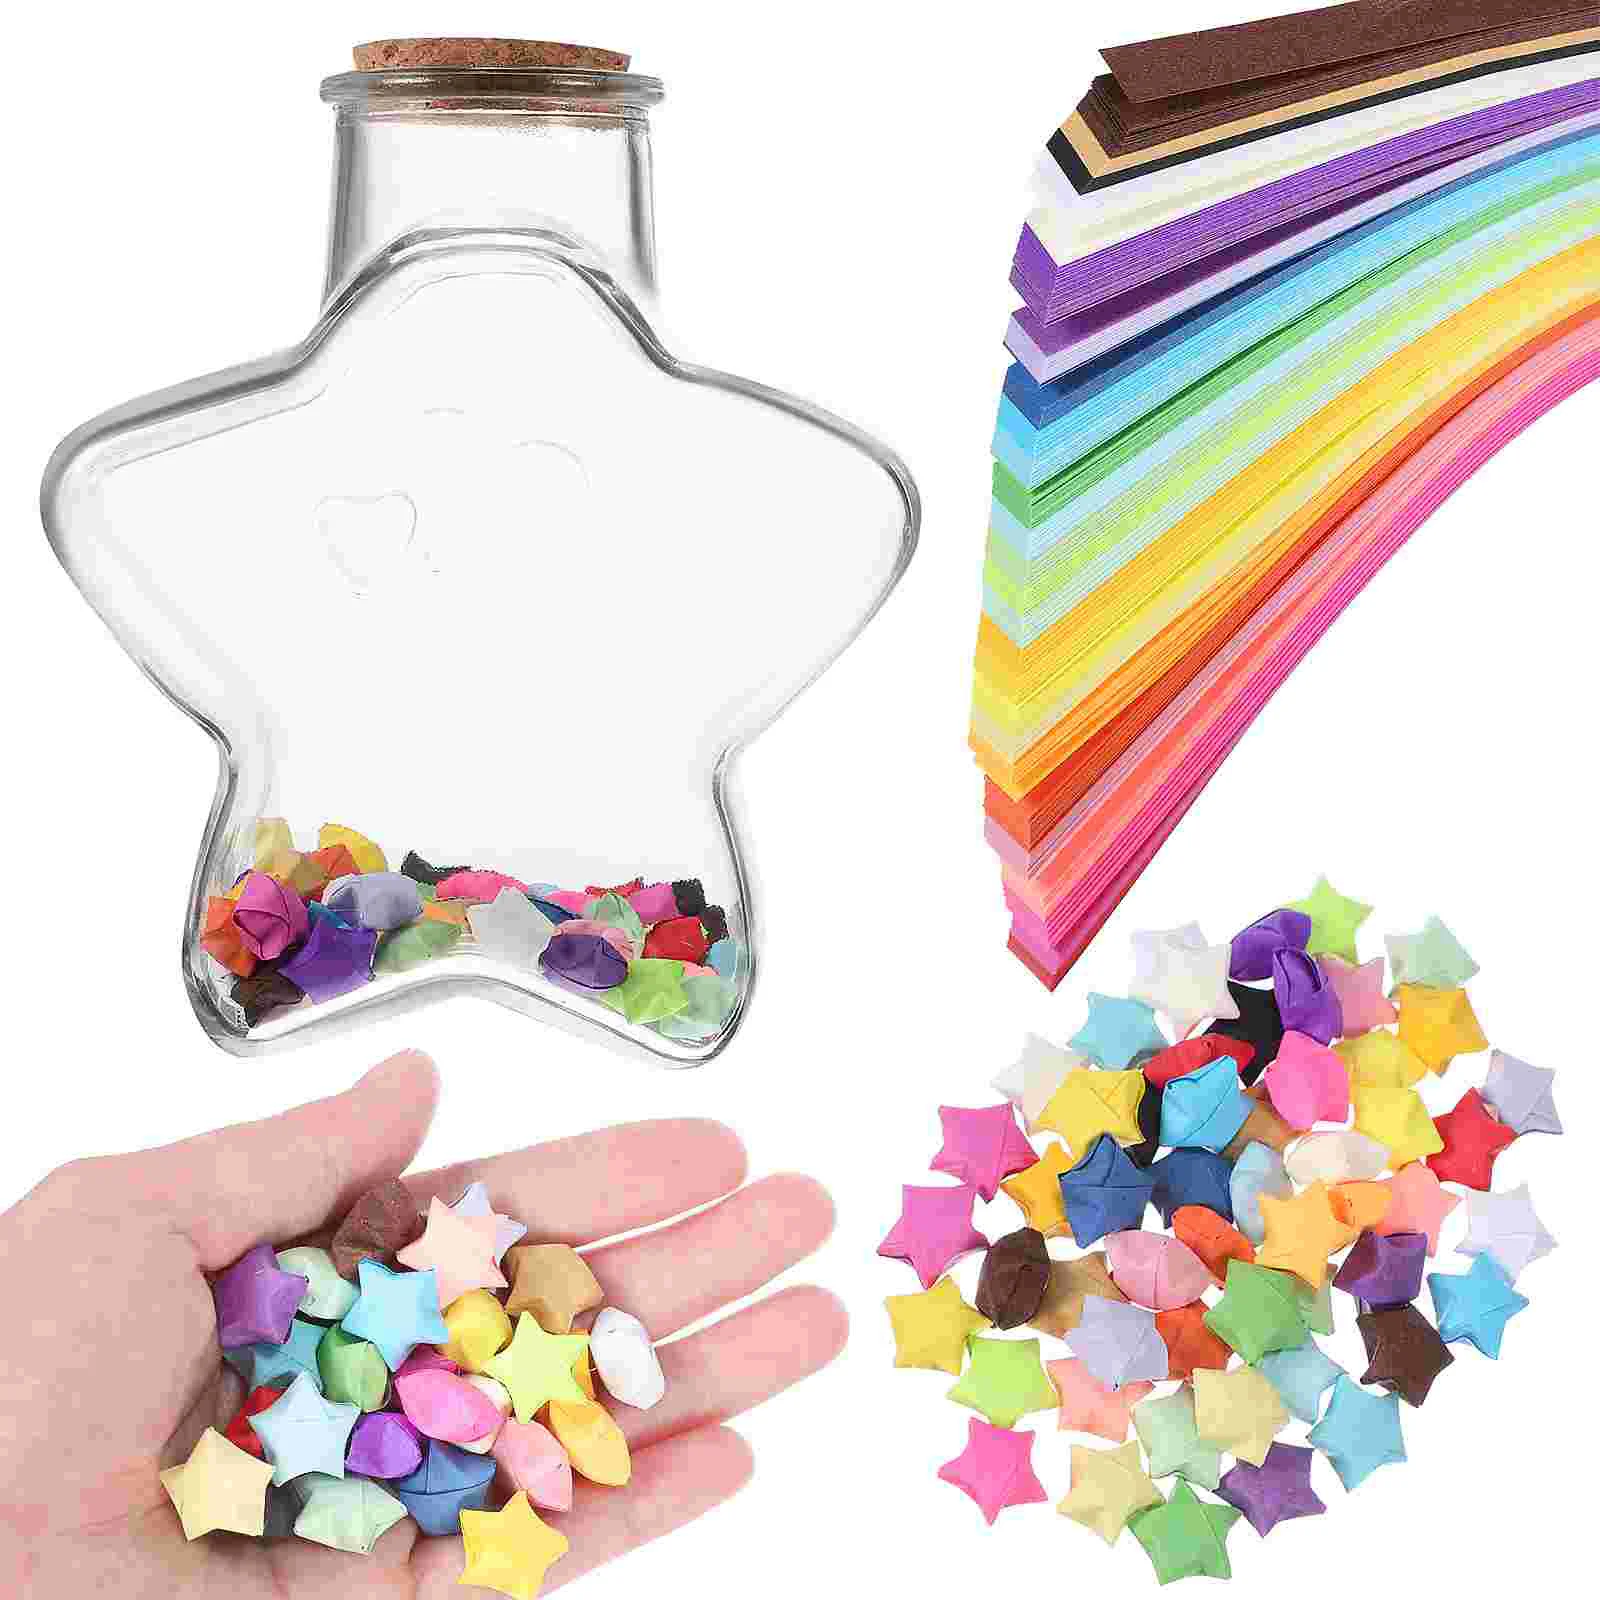 

540 Sheets Girly Decor Origami Paper Strips Lucky Rainbow Star Jar Cellophane Folding Colorful